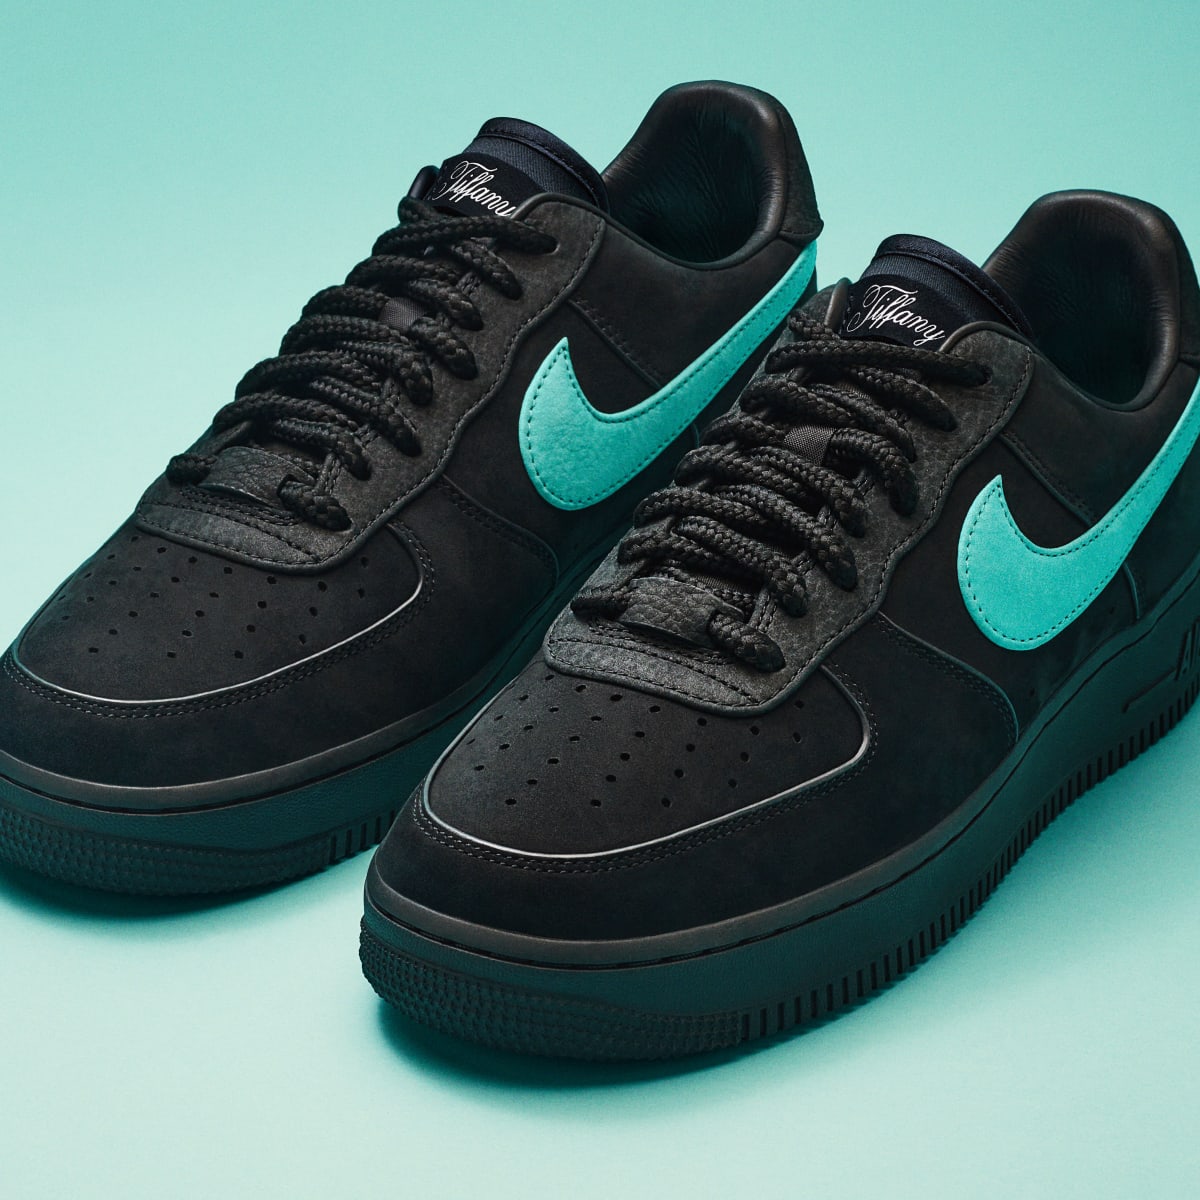 Nike and Tiffany & Co. collab on new pair of $400 sneakers 